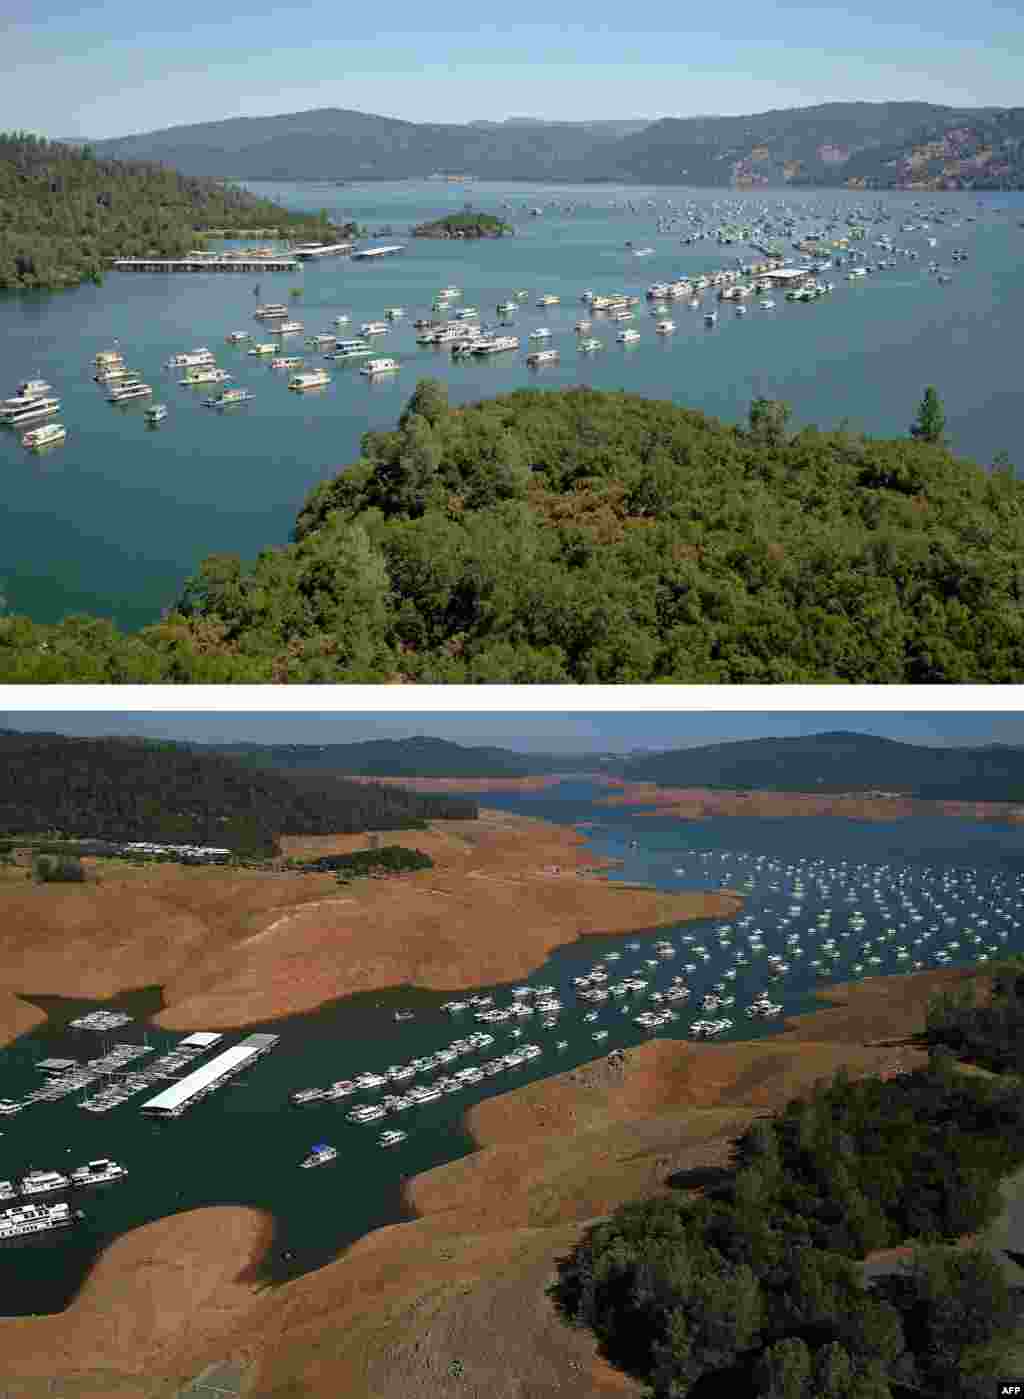 In this before-and-after composite image, (Top) Full water levels are visible in the Bidwell Marina at Lake Oroville in Oroville, California, July 20, 2011. (Bottom) Low water levels are visible in the Bidwell Marina at Lake Oroville, Aug. 19, 2014.